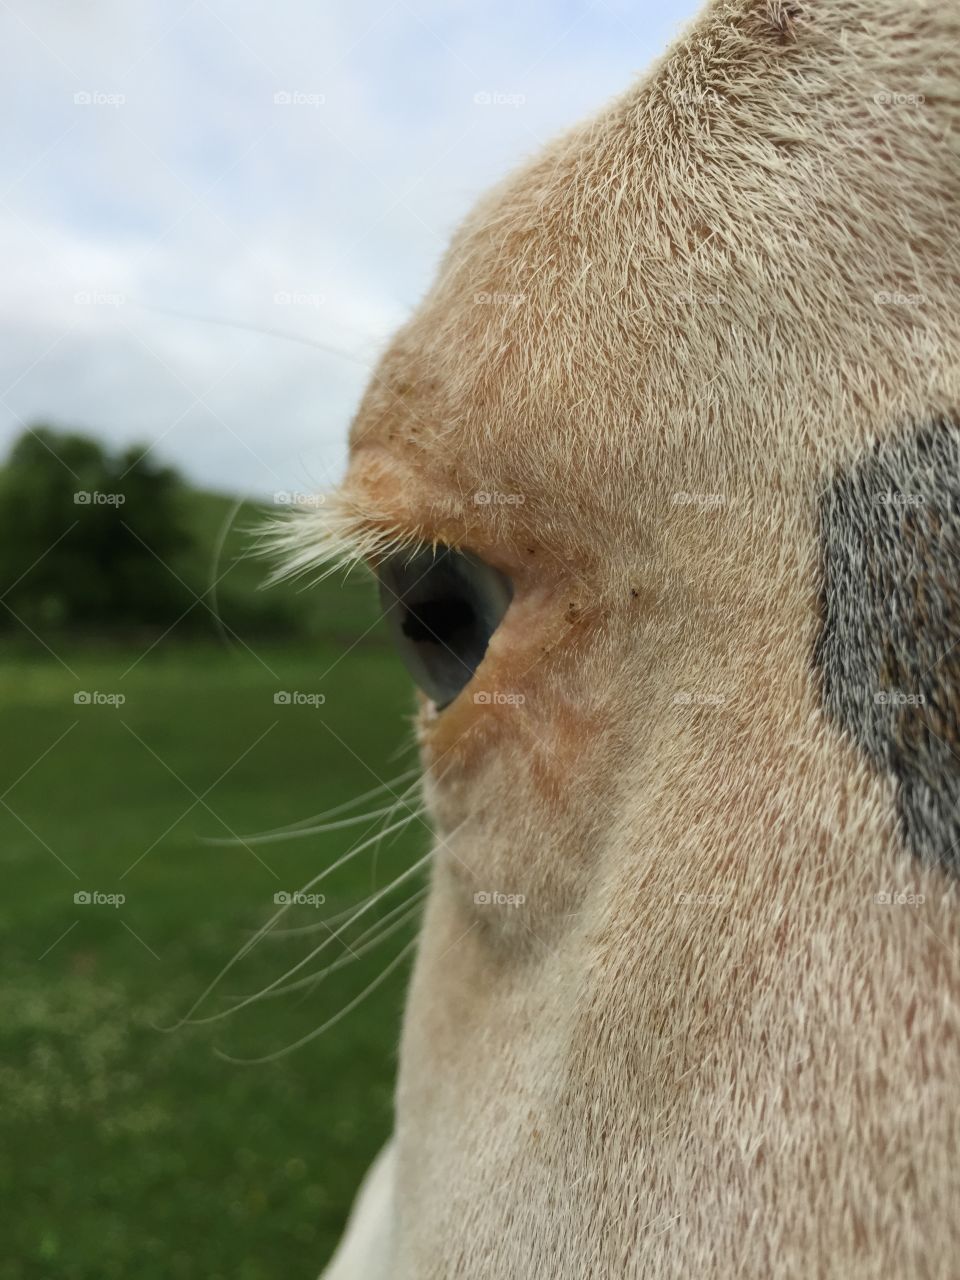 This photo is  focused on a white horse's blue eye